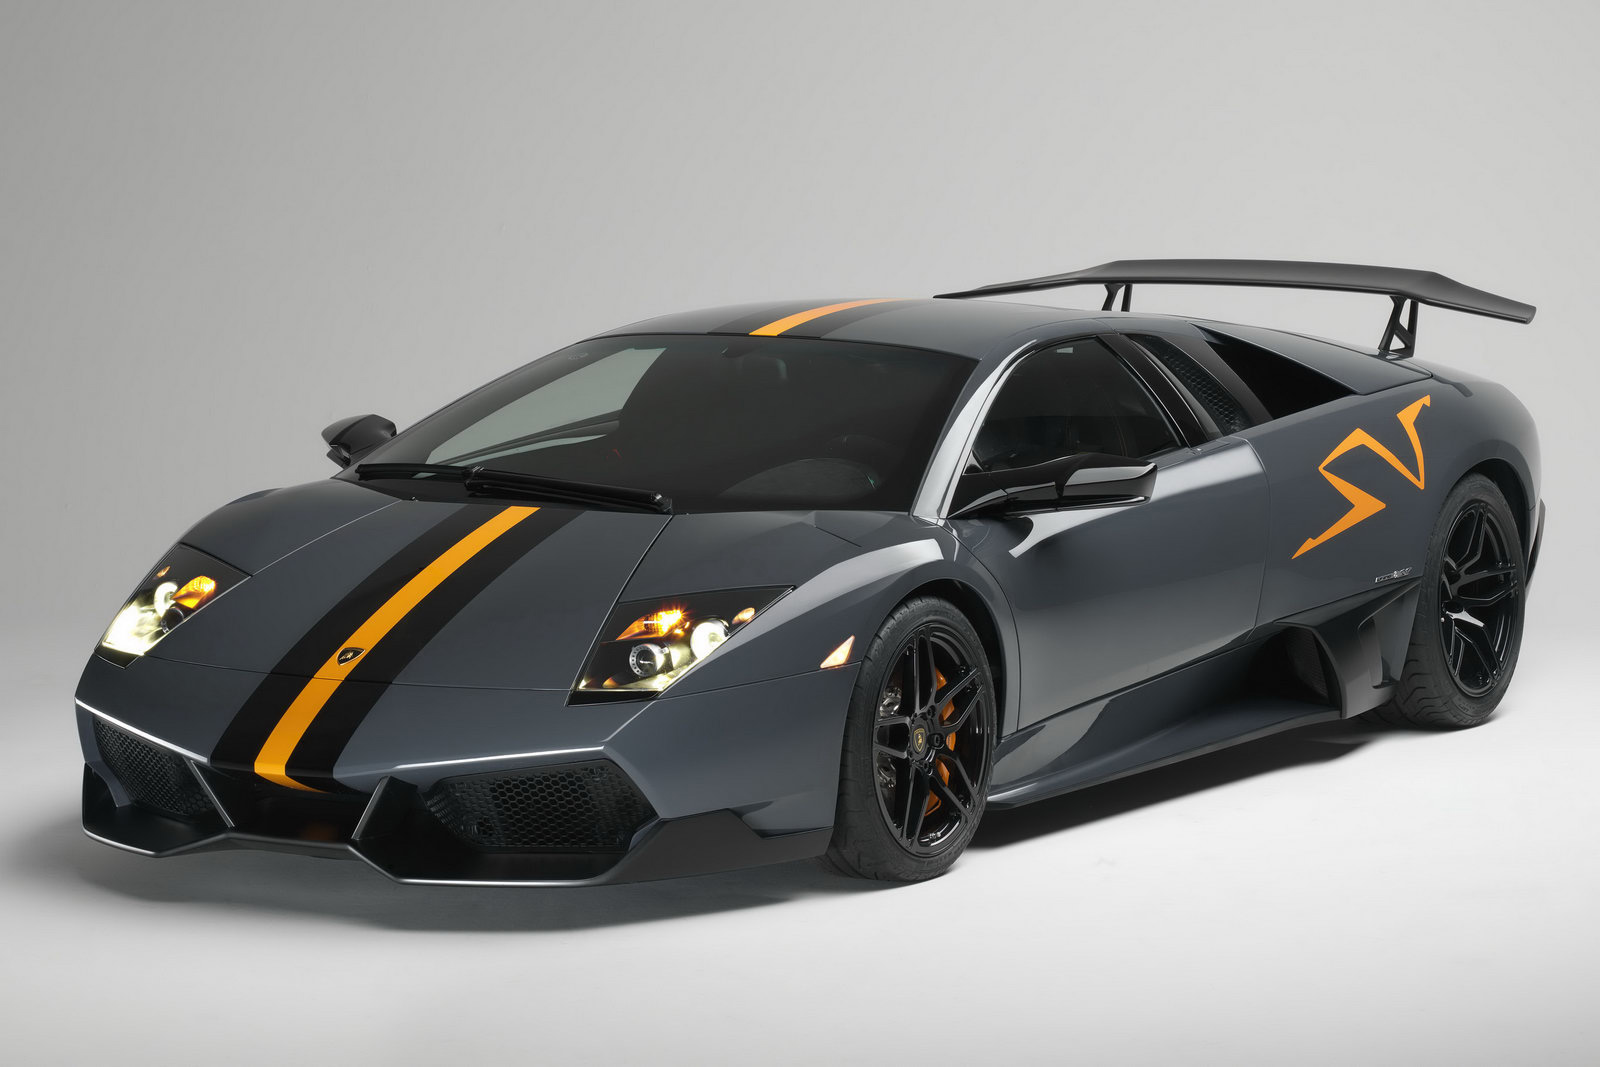 Guinness Book: Top 10 List of the Most Expensive Cars in 